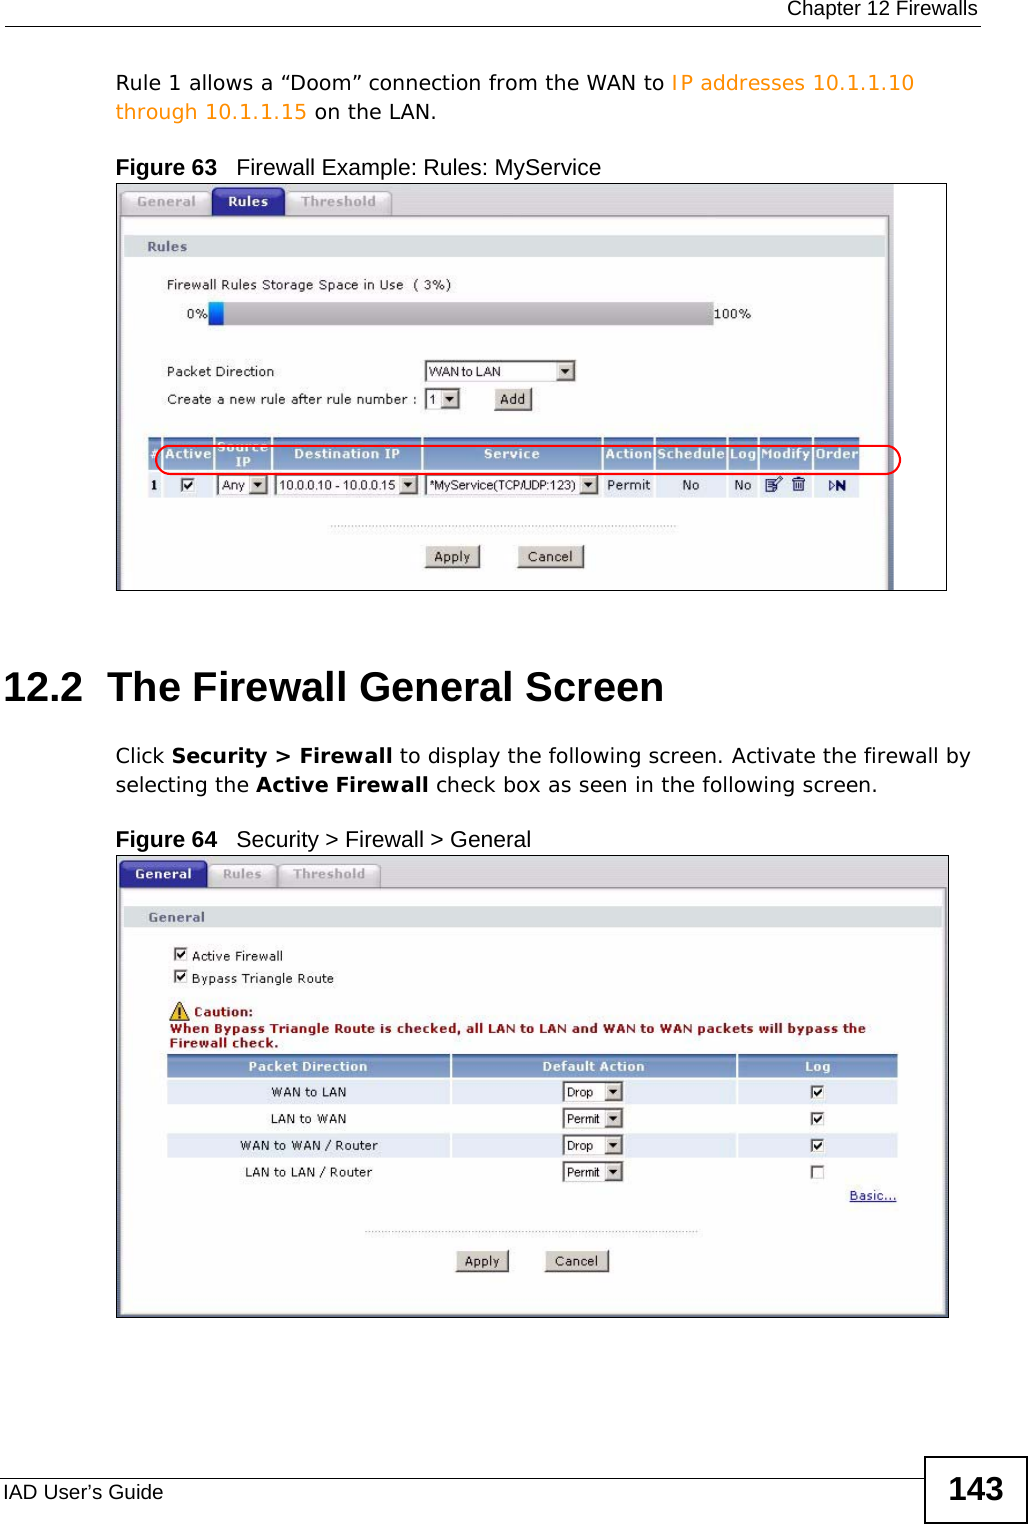  Chapter 12 FirewallsIAD User’s Guide 143Rule 1 allows a “Doom” connection from the WAN to IP addresses 10.1.1.10 through 10.1.1.15 on the LAN.Figure 63   Firewall Example: Rules: MyService 12.2  The Firewall General Screen   Click Security &gt; Firewall to display the following screen. Activate the firewall by selecting the Active Firewall check box as seen in the following screen.Figure 64   Security &gt; Firewall &gt; General